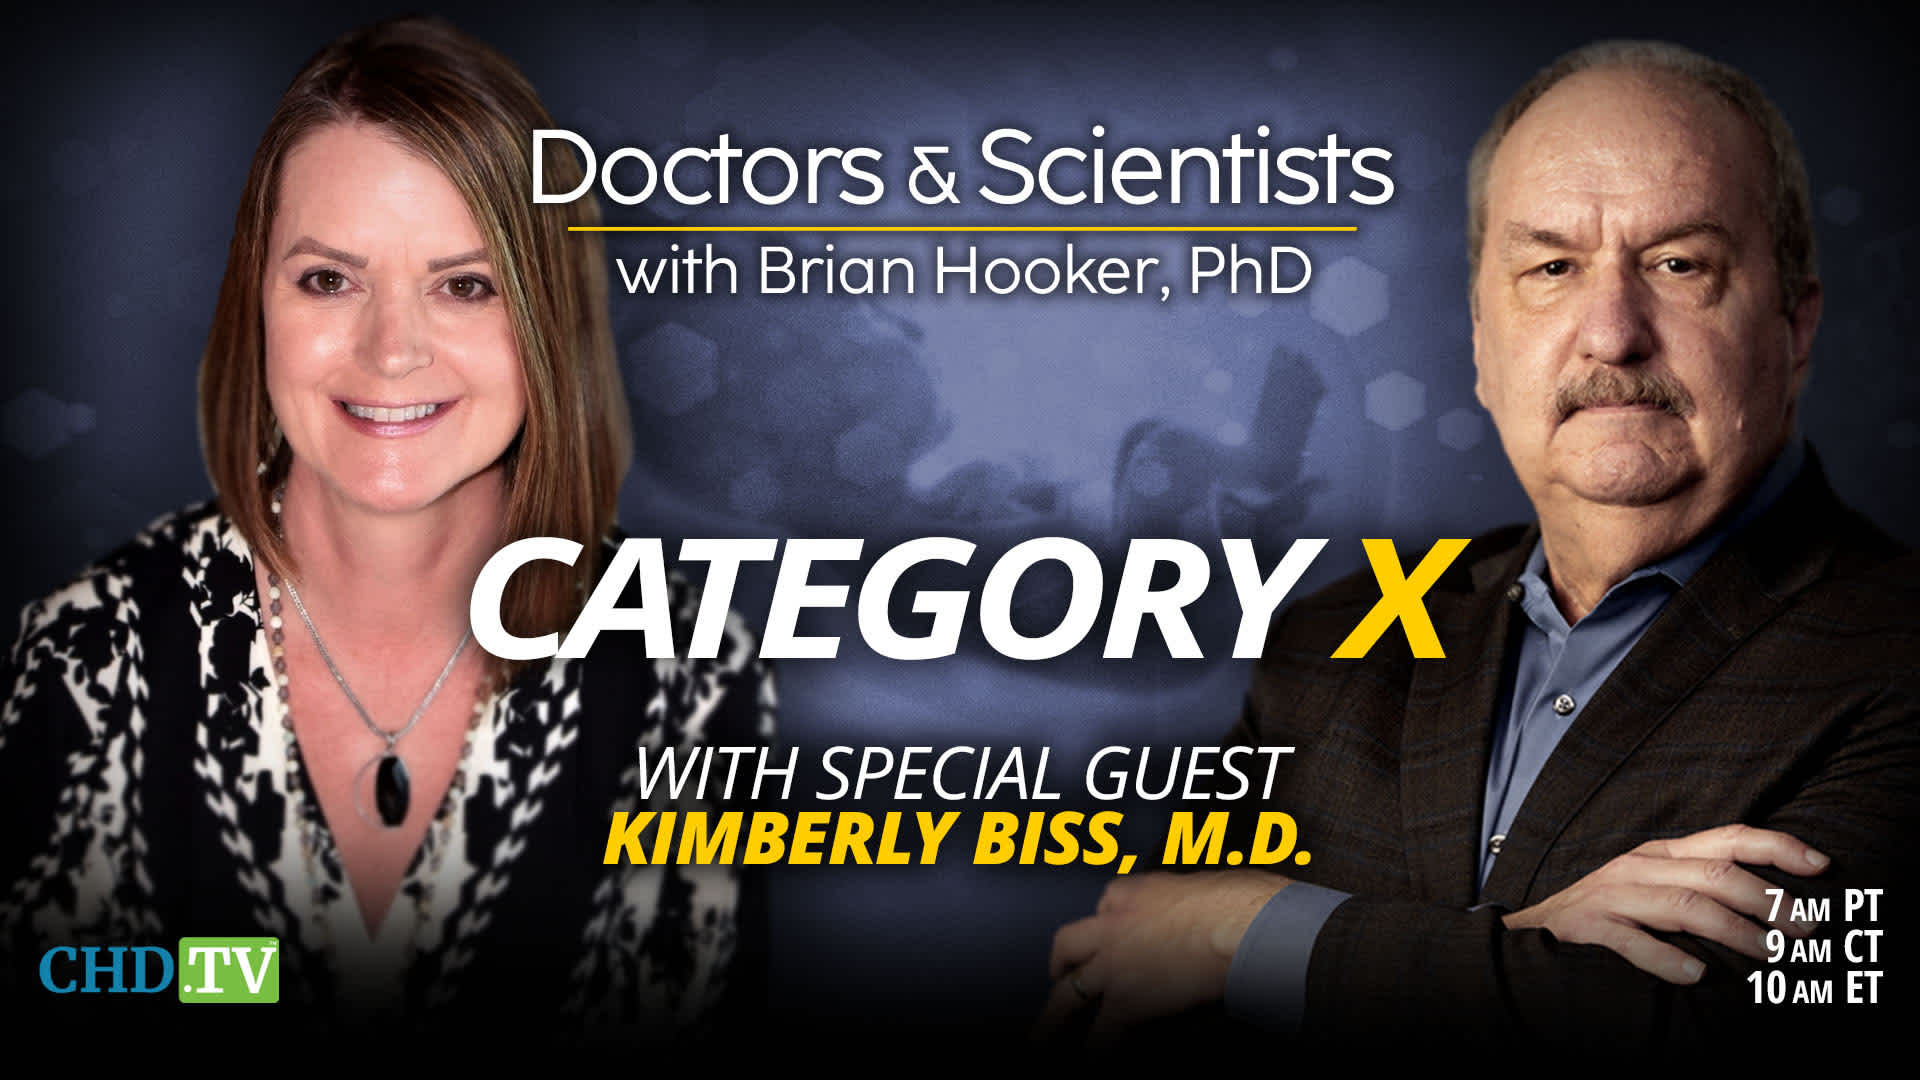 Category X With Special Guest Kimberly Biss, M.D.